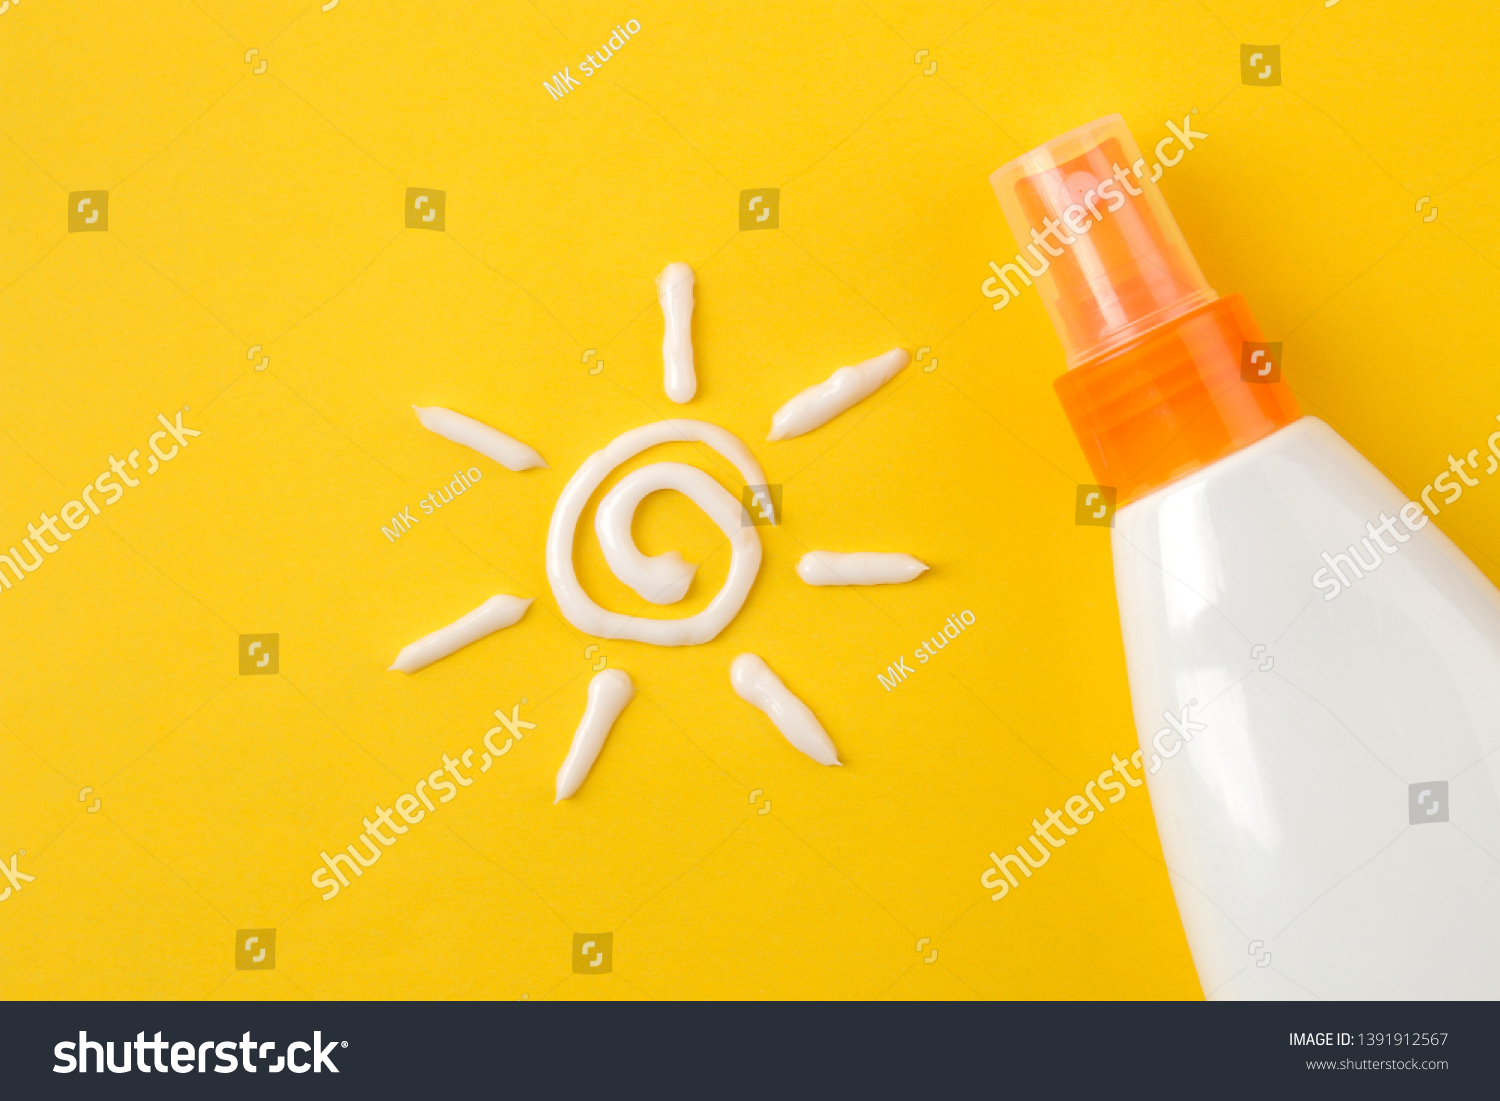 sunscreen remedy. various sunscreens and sun cream on a bright yellow background. Sun protection. Ultraviolet protection. Summer. top view. #1391912567